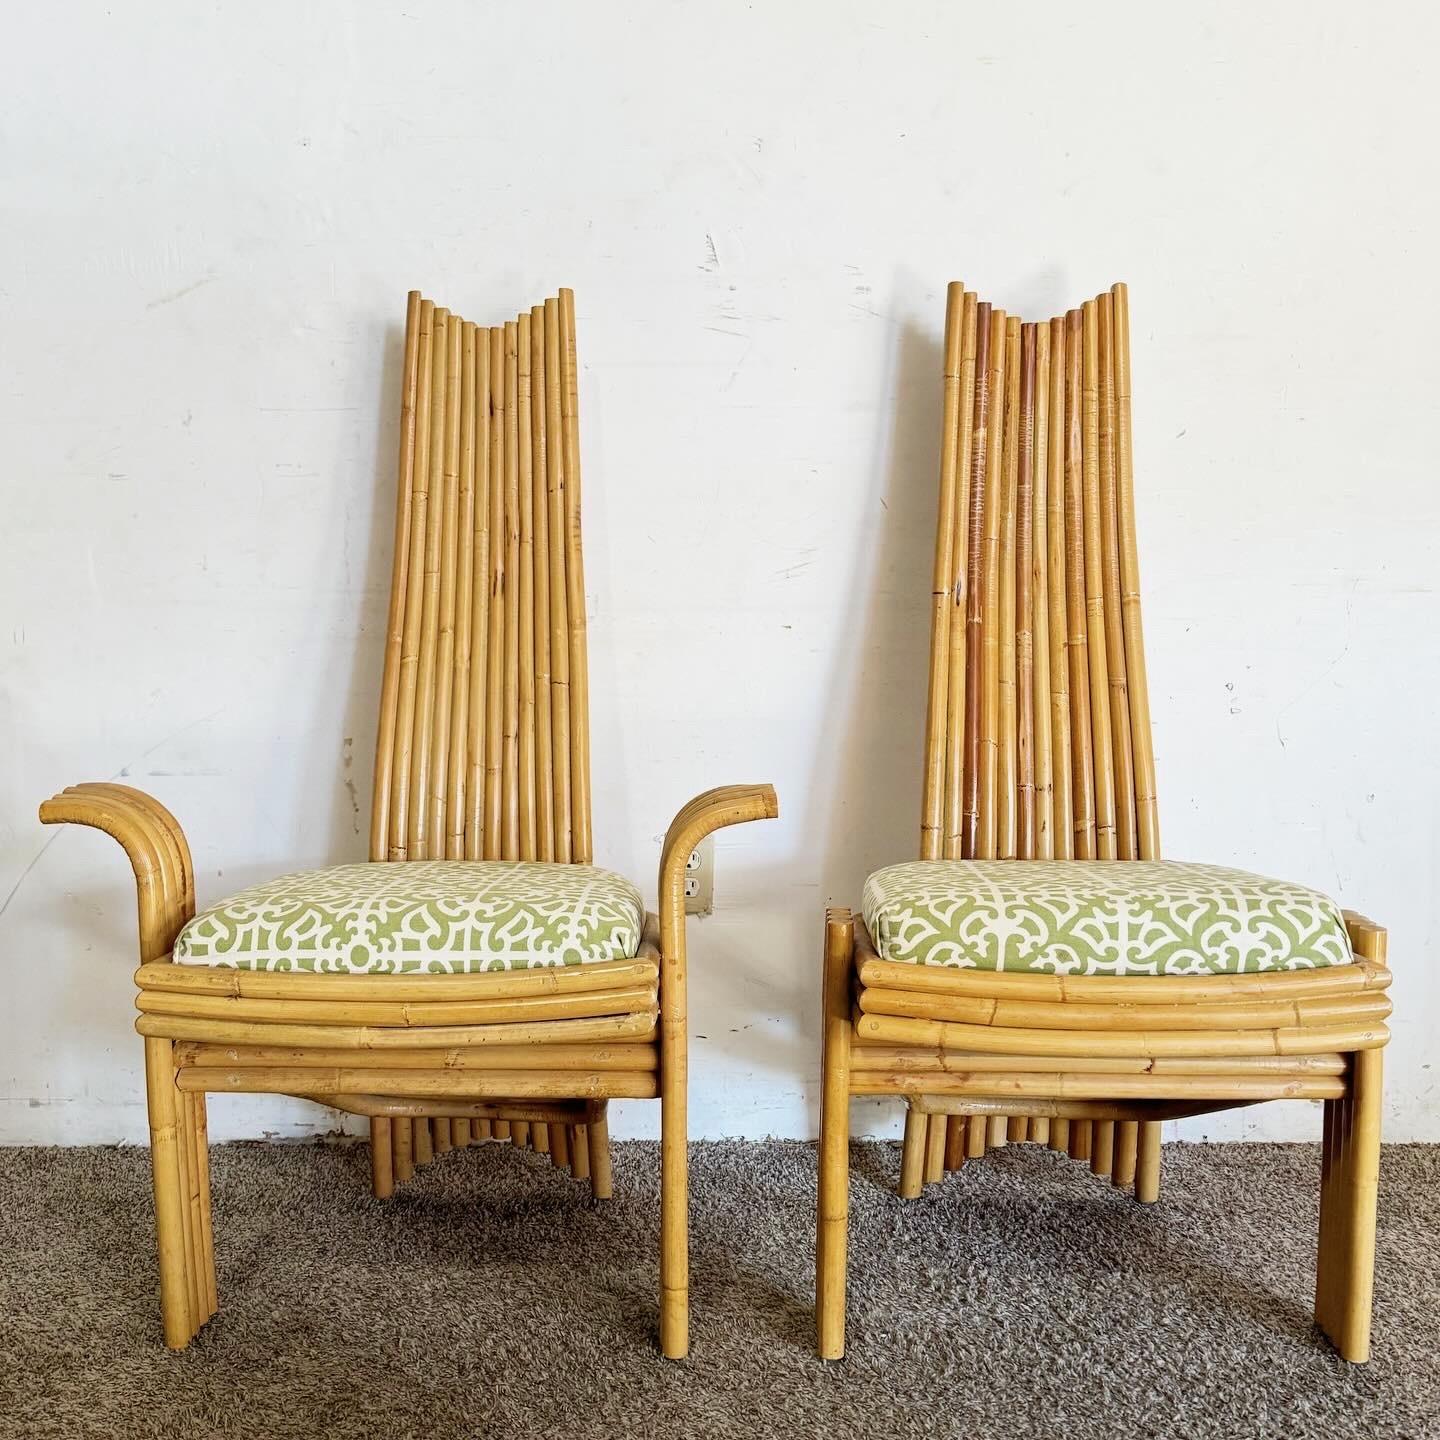 Indonesian 1970s Vintage Boho Chic High Back Bamboo Dining Chairs - Set of 6 For Sale